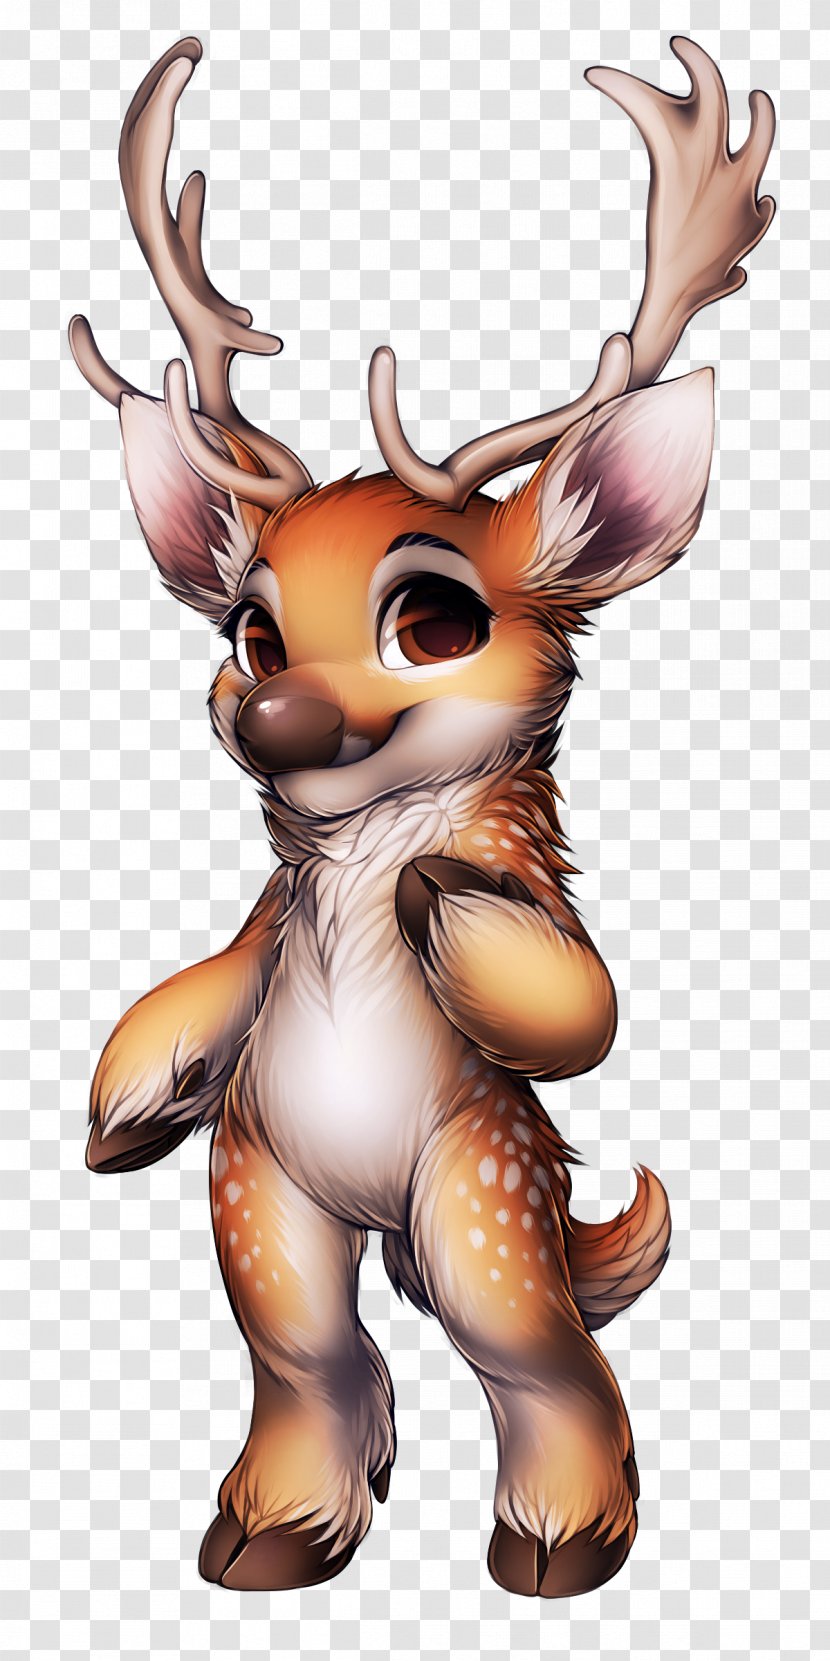 Reindeer White-tailed Deer Fallow - Furry Fandom - A Stumbled By Stone Transparent PNG